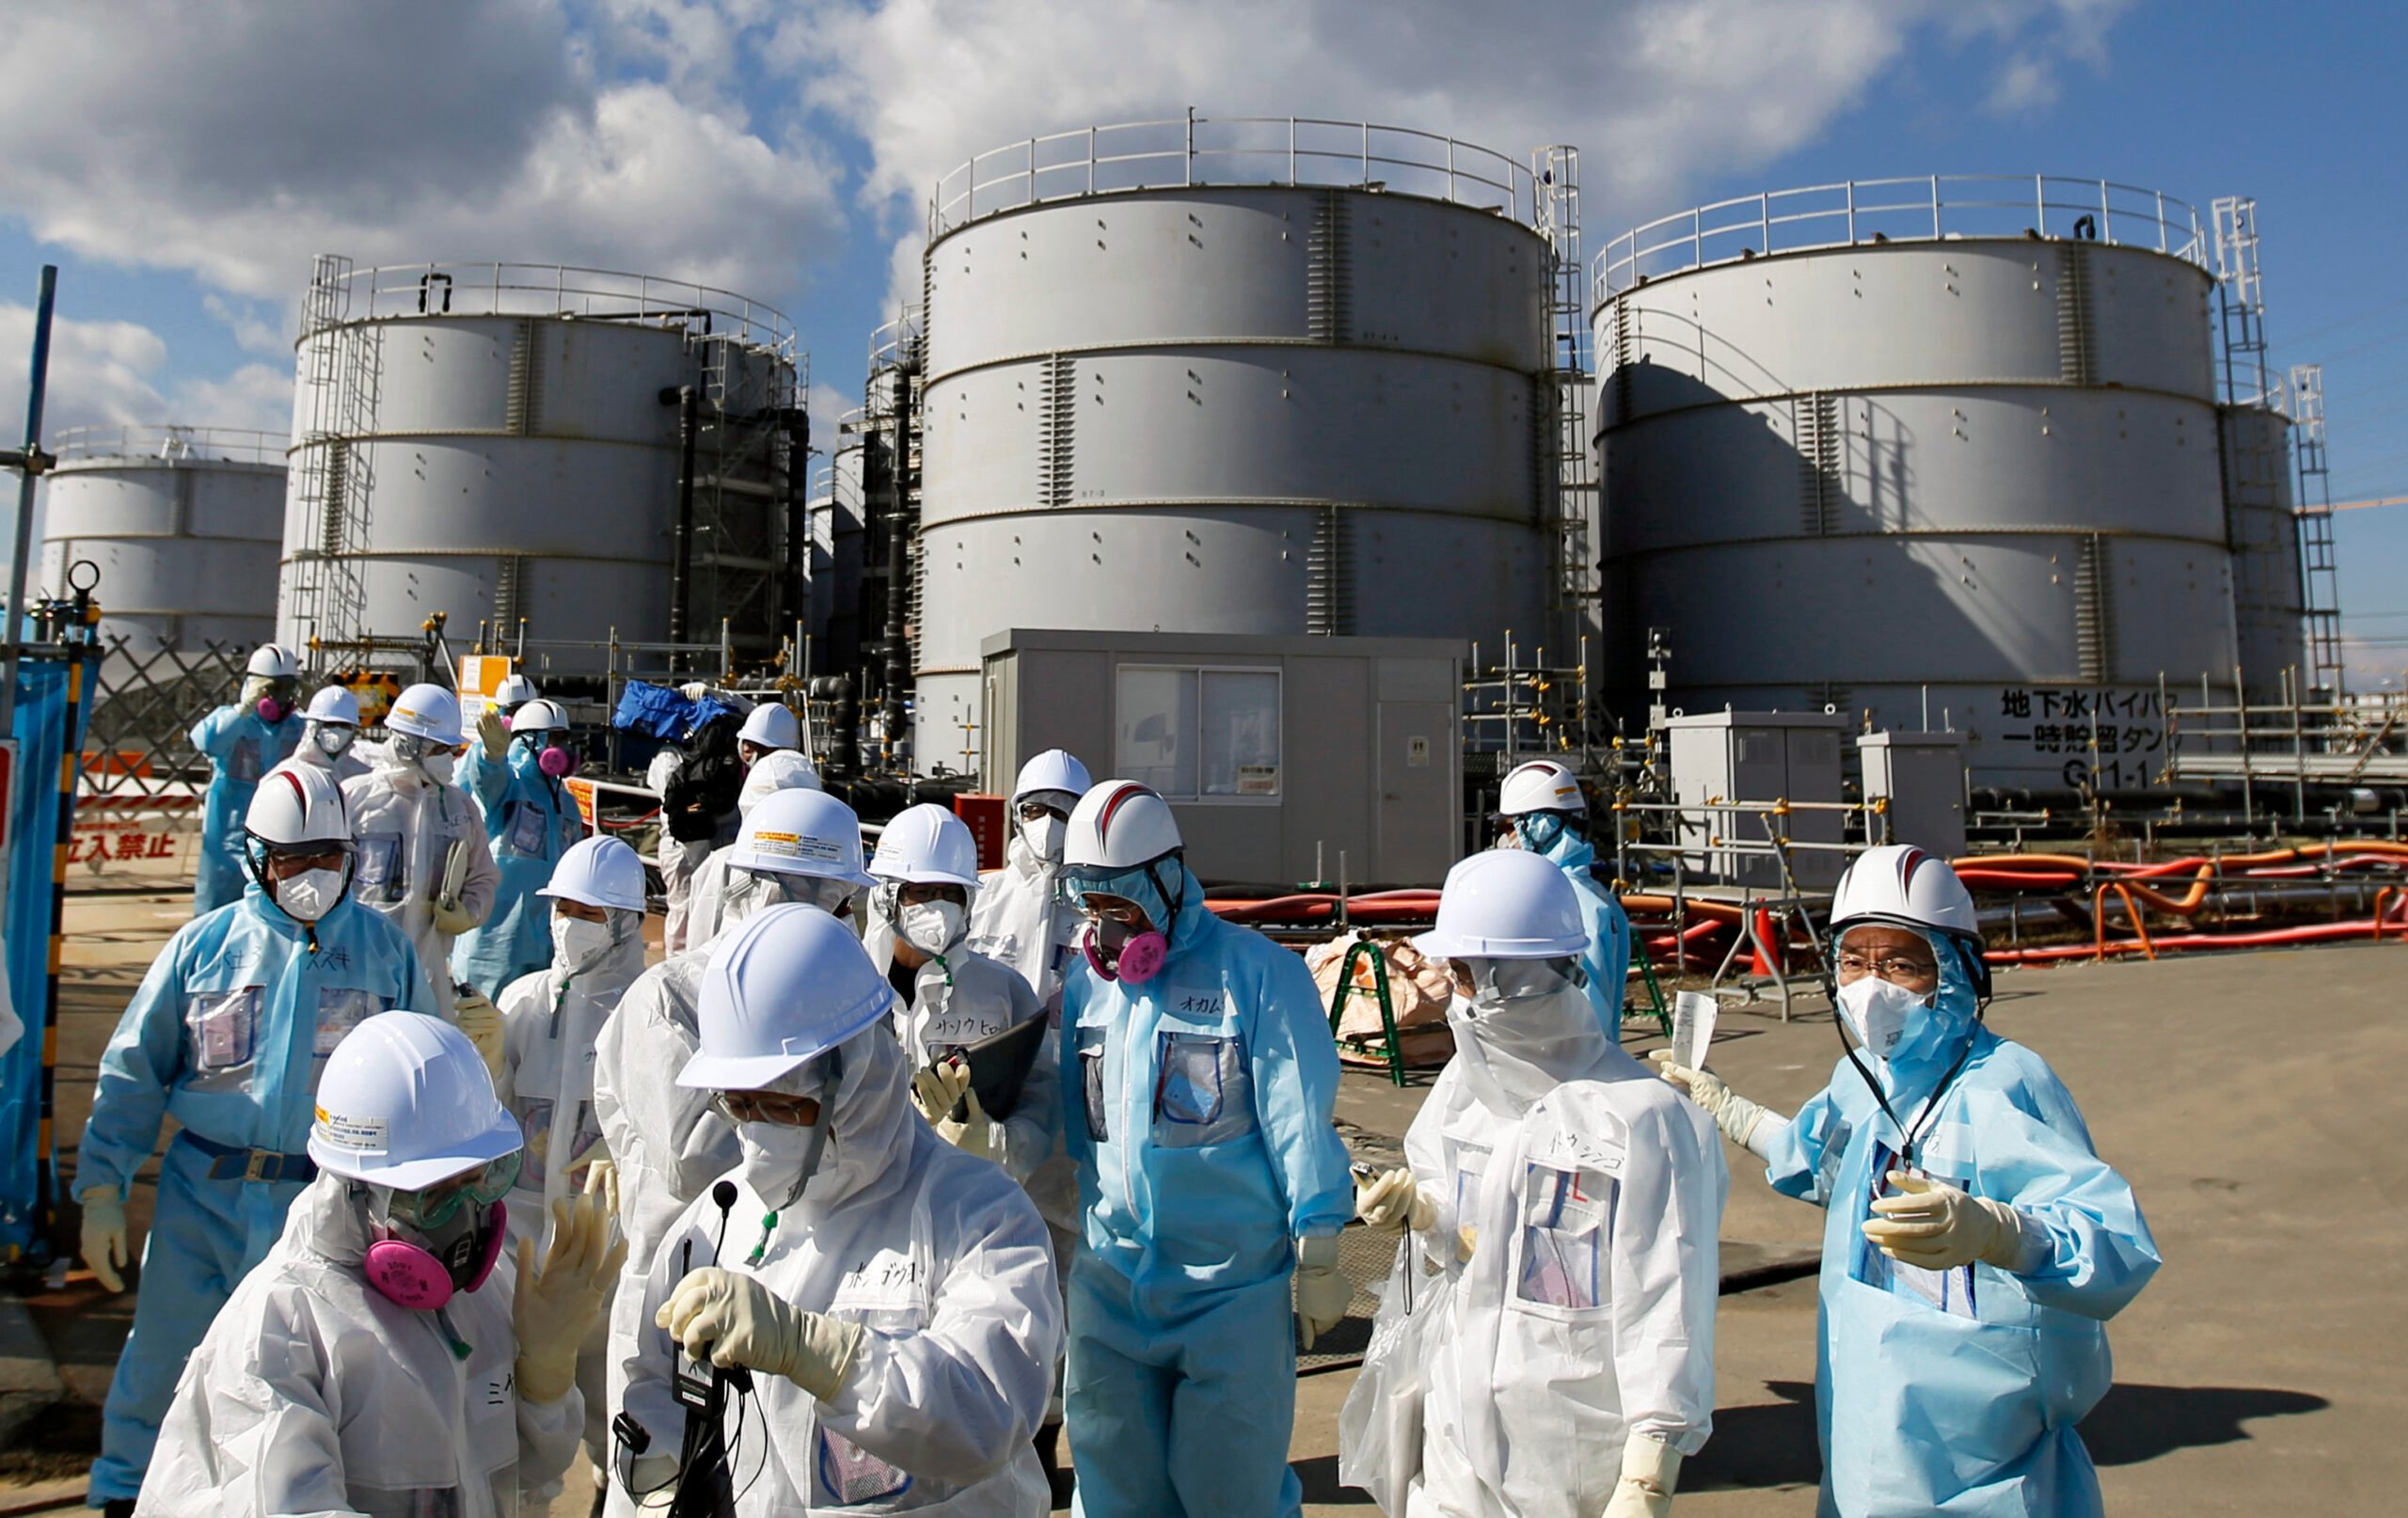 Japan, US, France to team up on Fukushima cleanup – official